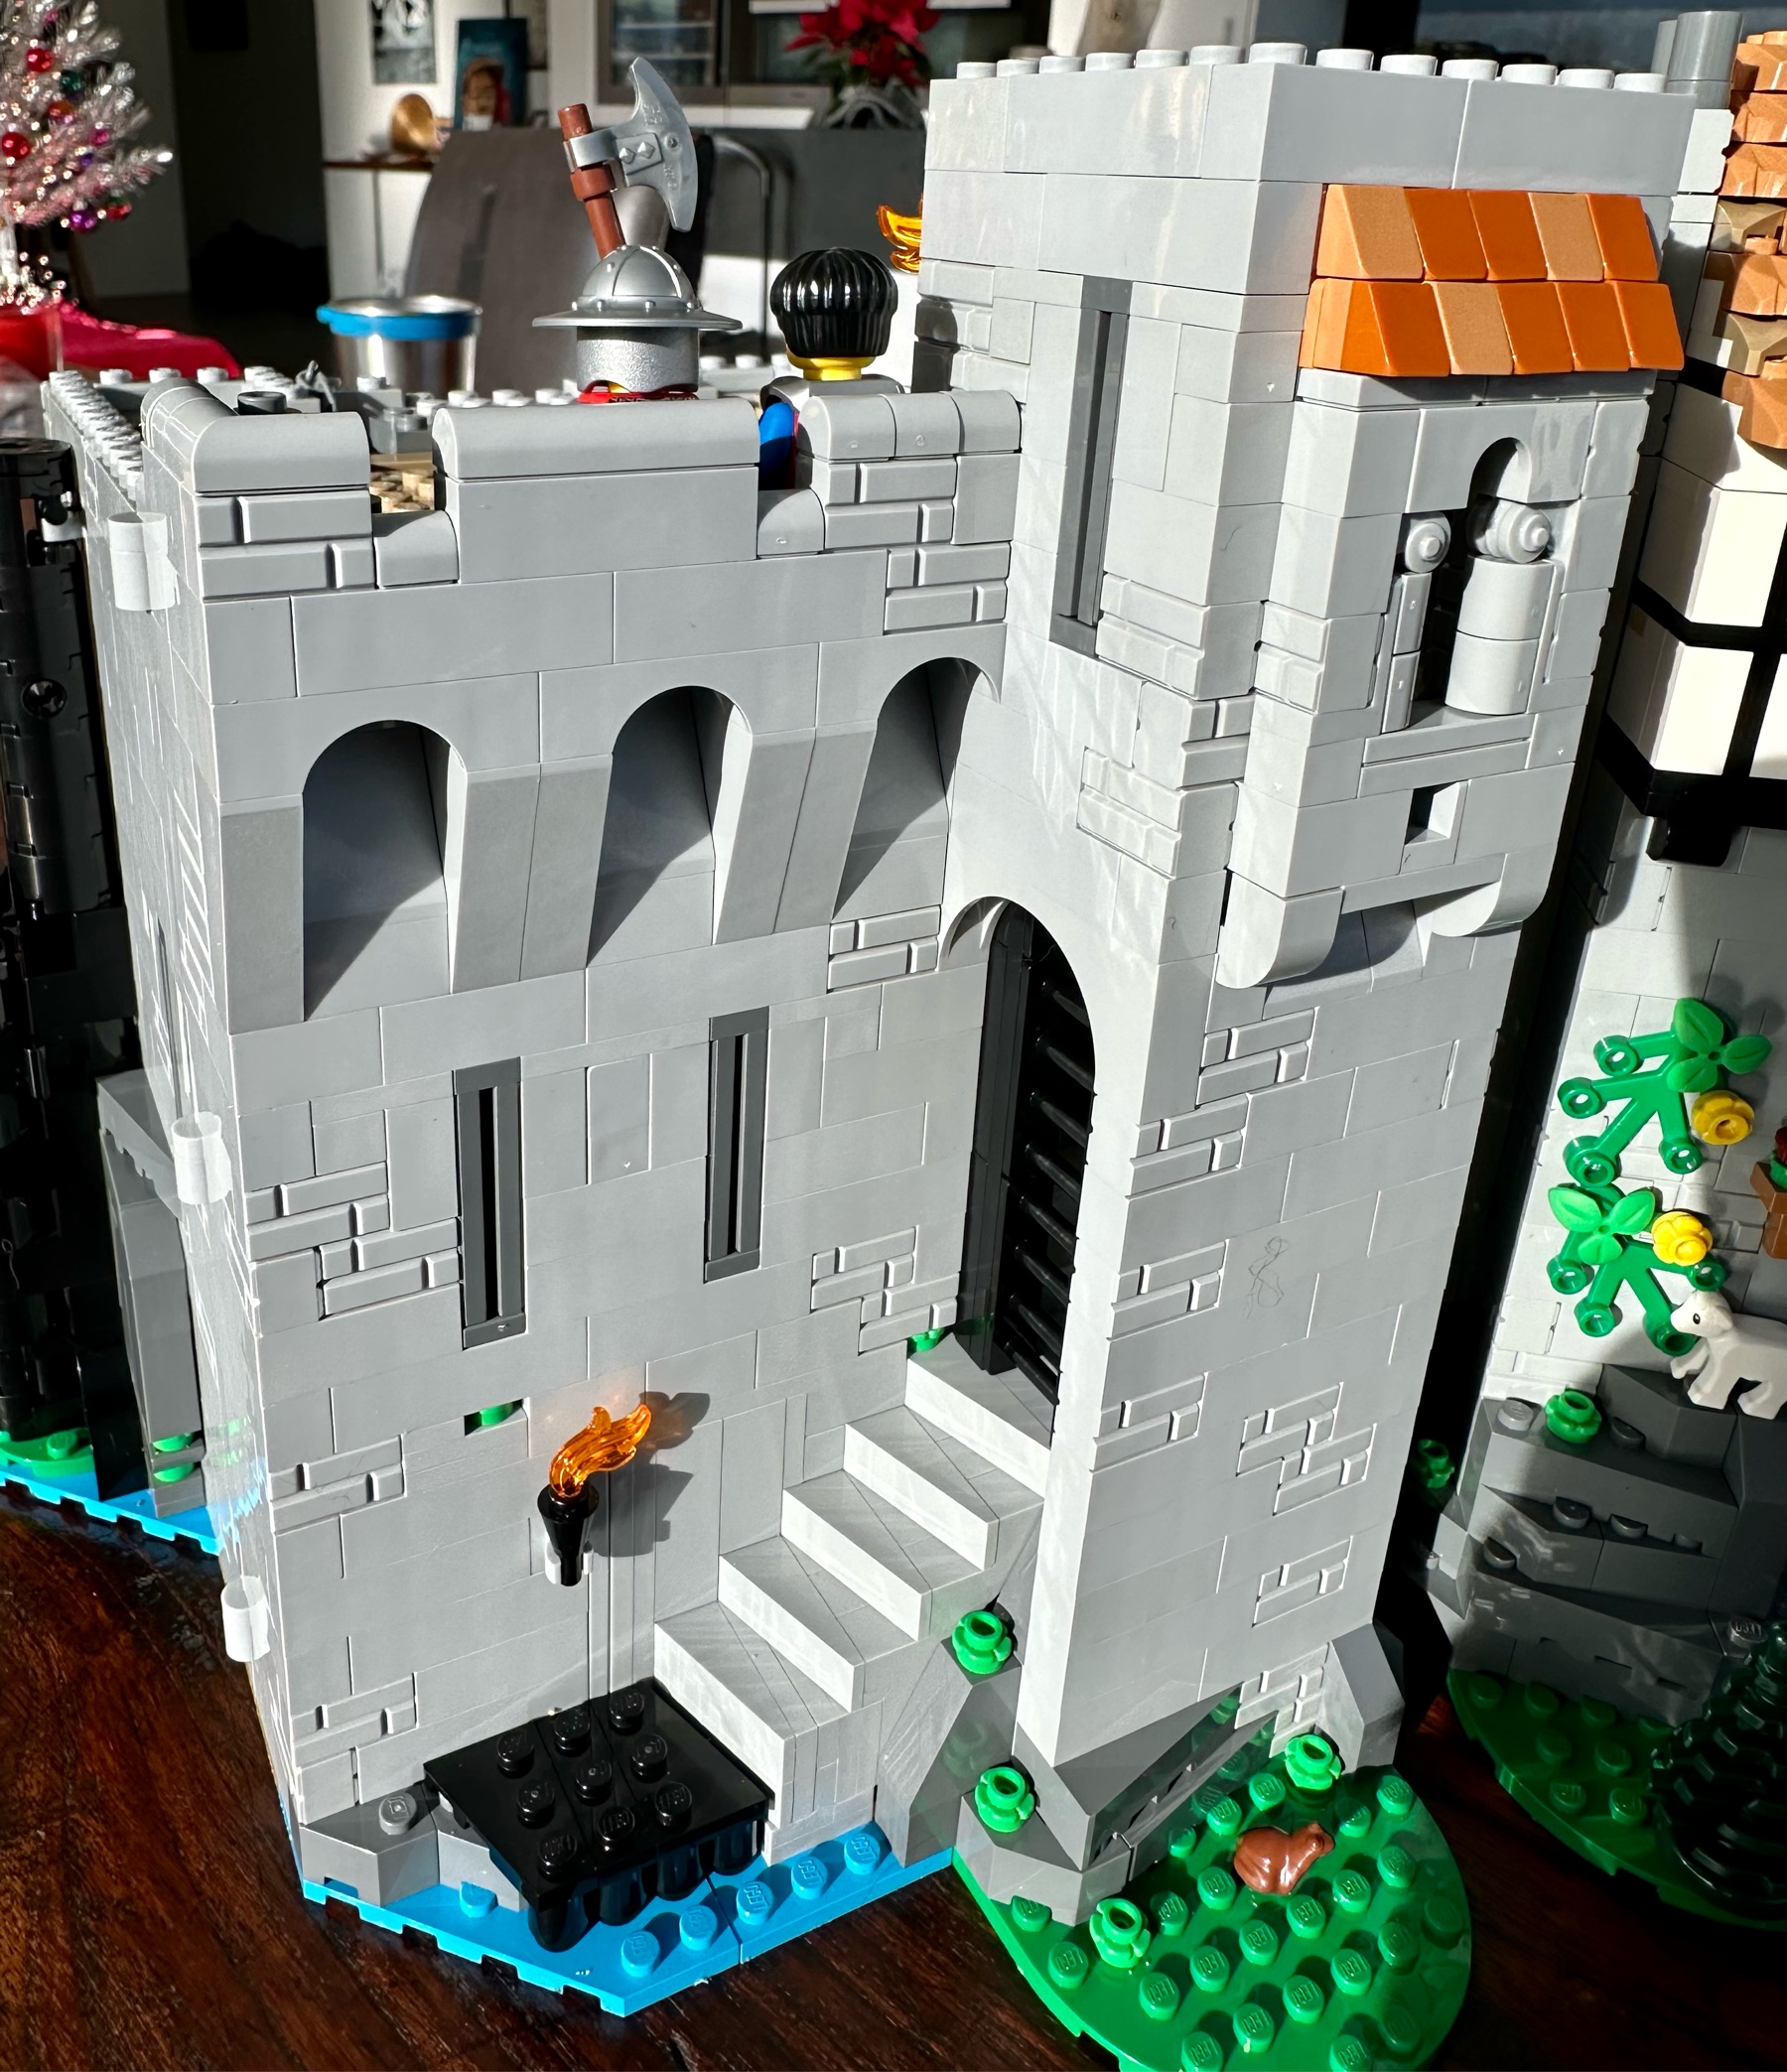 Exterior view of LEGO castle showing a black portcullis lowered at the top of a flight of stairs. Above the backs of two guards can be seen leaning against the parapet.